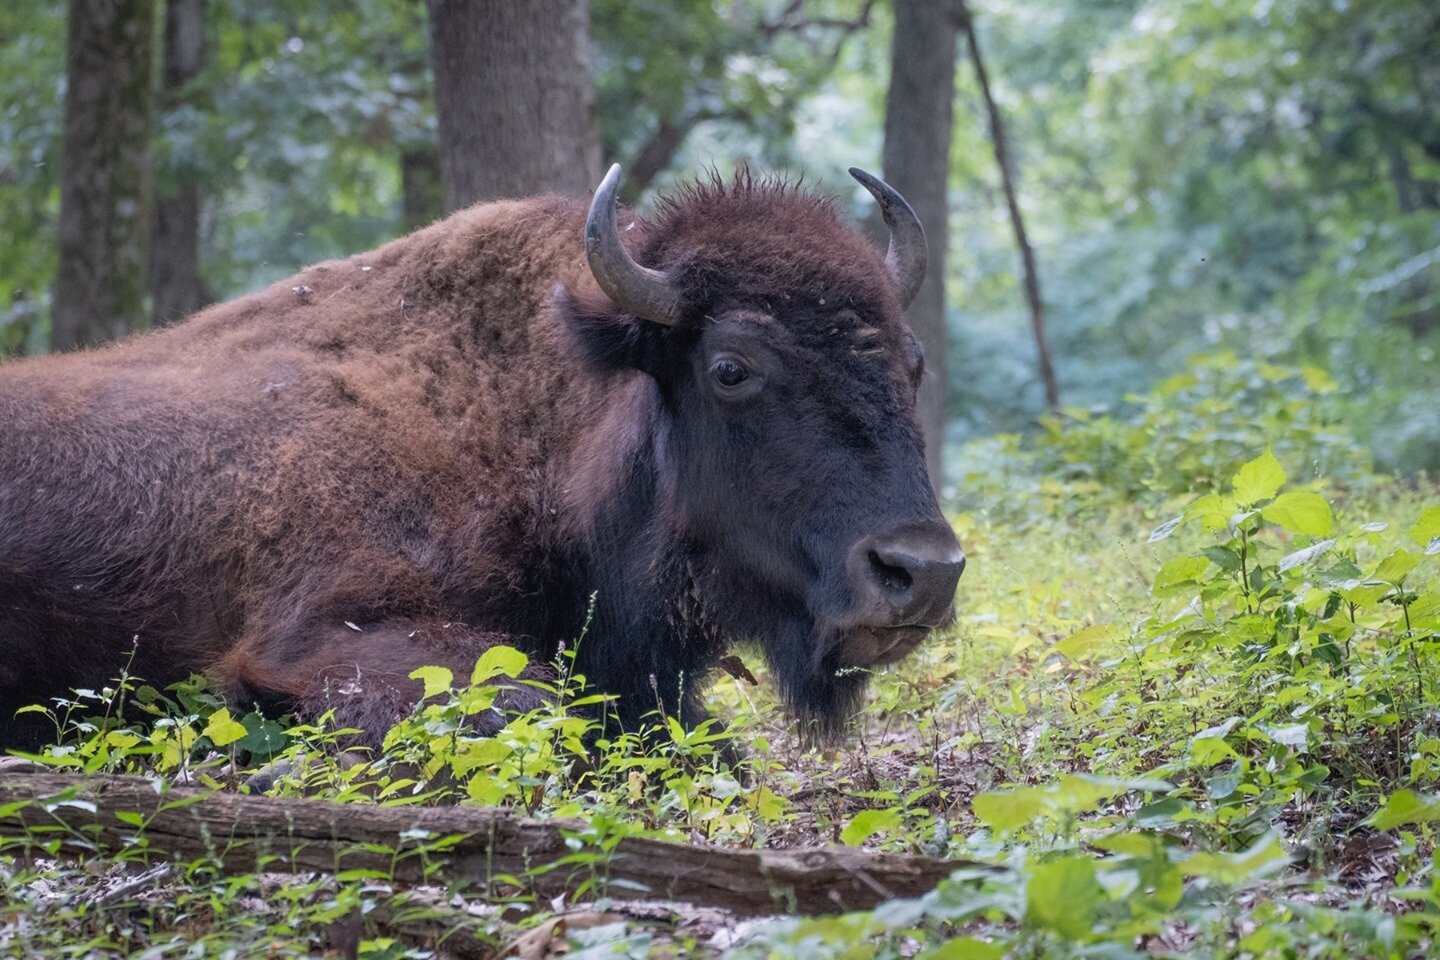 American bison (Bison bison) 🤎
&bull;&bull;&bull;&bull;
&ldquo;If we can teach people about wildlife, they will be touched. Share my wildlife with me. Because humans want to save things that they love.&rdquo; ― Steve Irwin
.
🦊Welcome to our #wildli